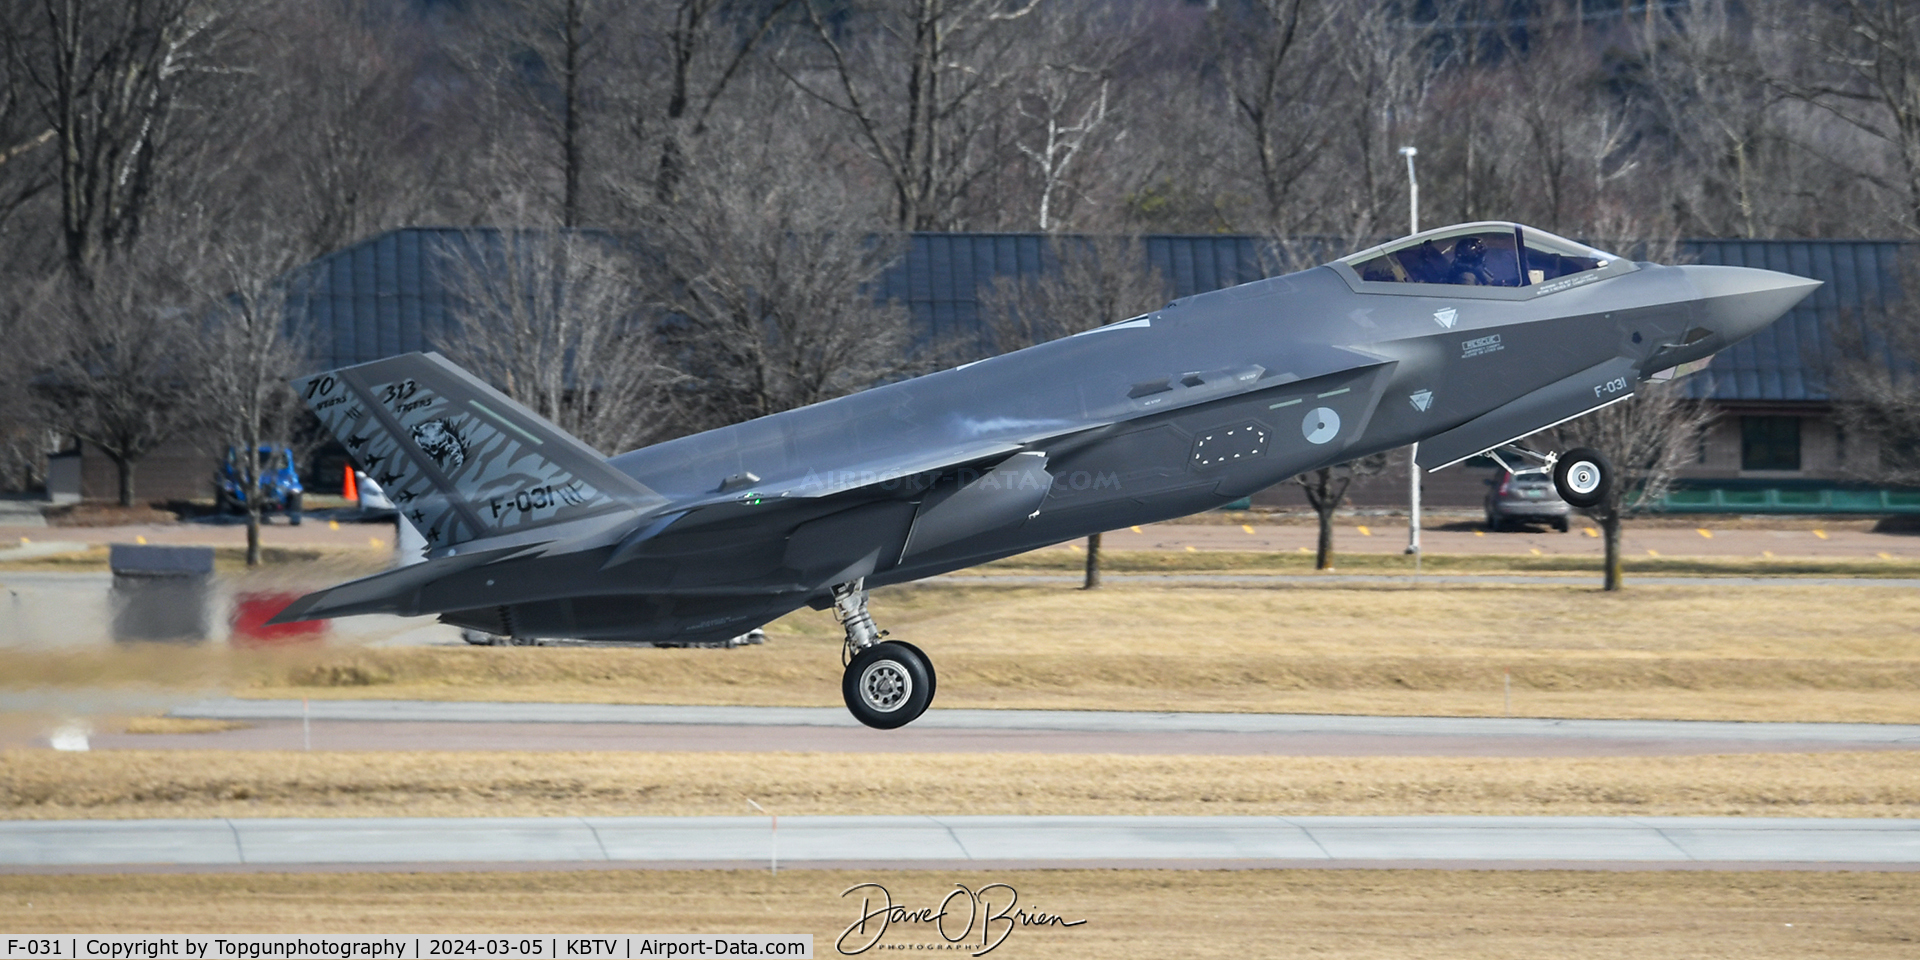 F-031, Lockheed Martin F-35A Lightning II C/N AN-31, Displaying the 70th Anniversary of the unit on its' tail